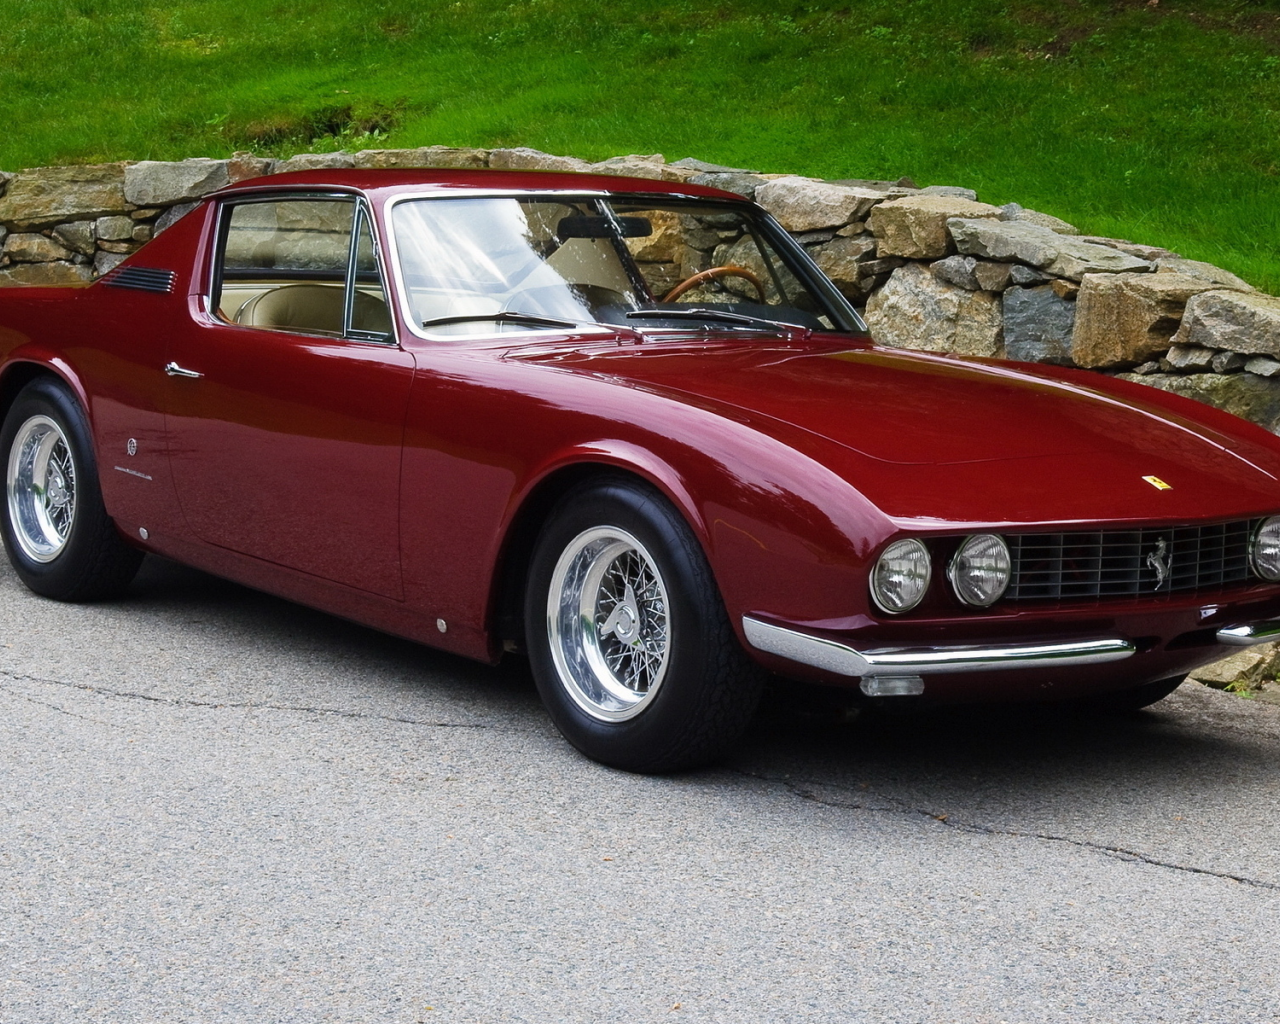 coupe by michelotti, фары, ferrari, 330 gt, дорога, камни, классика, 1967